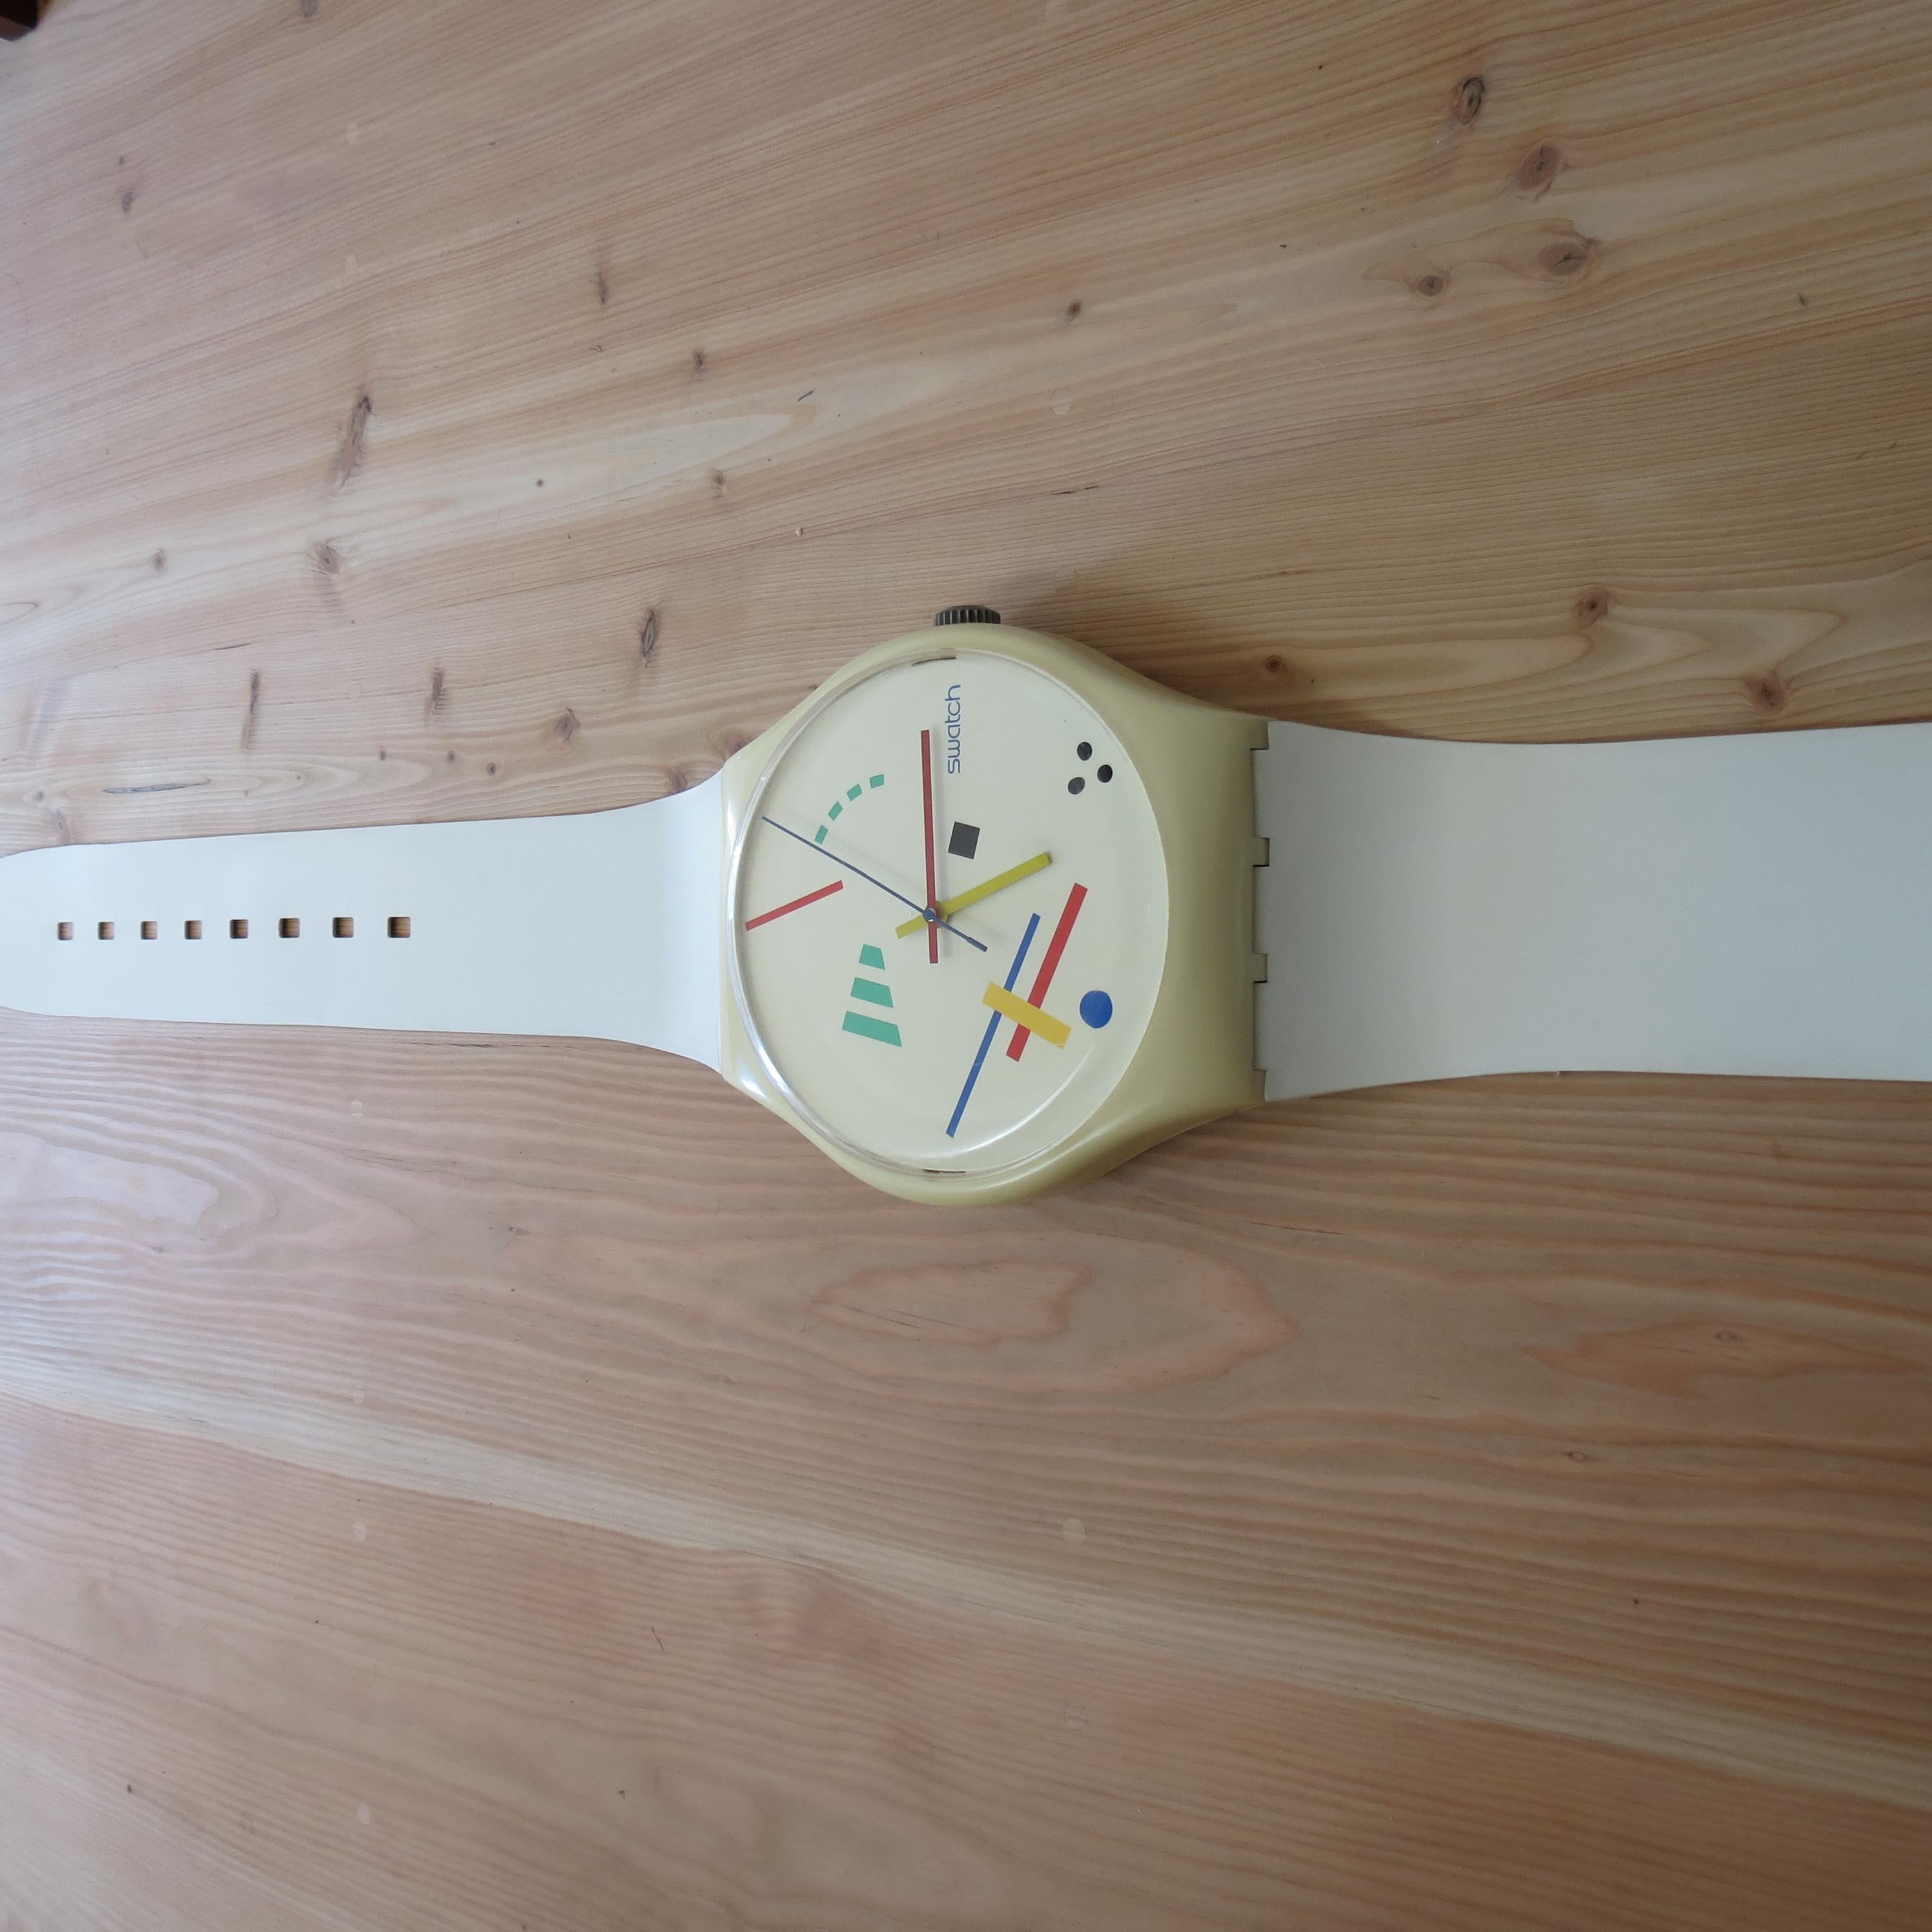 A very rare original Wall hanging swatch maxi wall clock, designed and manufactured by Swatch, Switzerland. Model: Vasily. Not a reproduction, but an original from 1987 (no date to the watch face, reissues were dated); only a few made during 1987